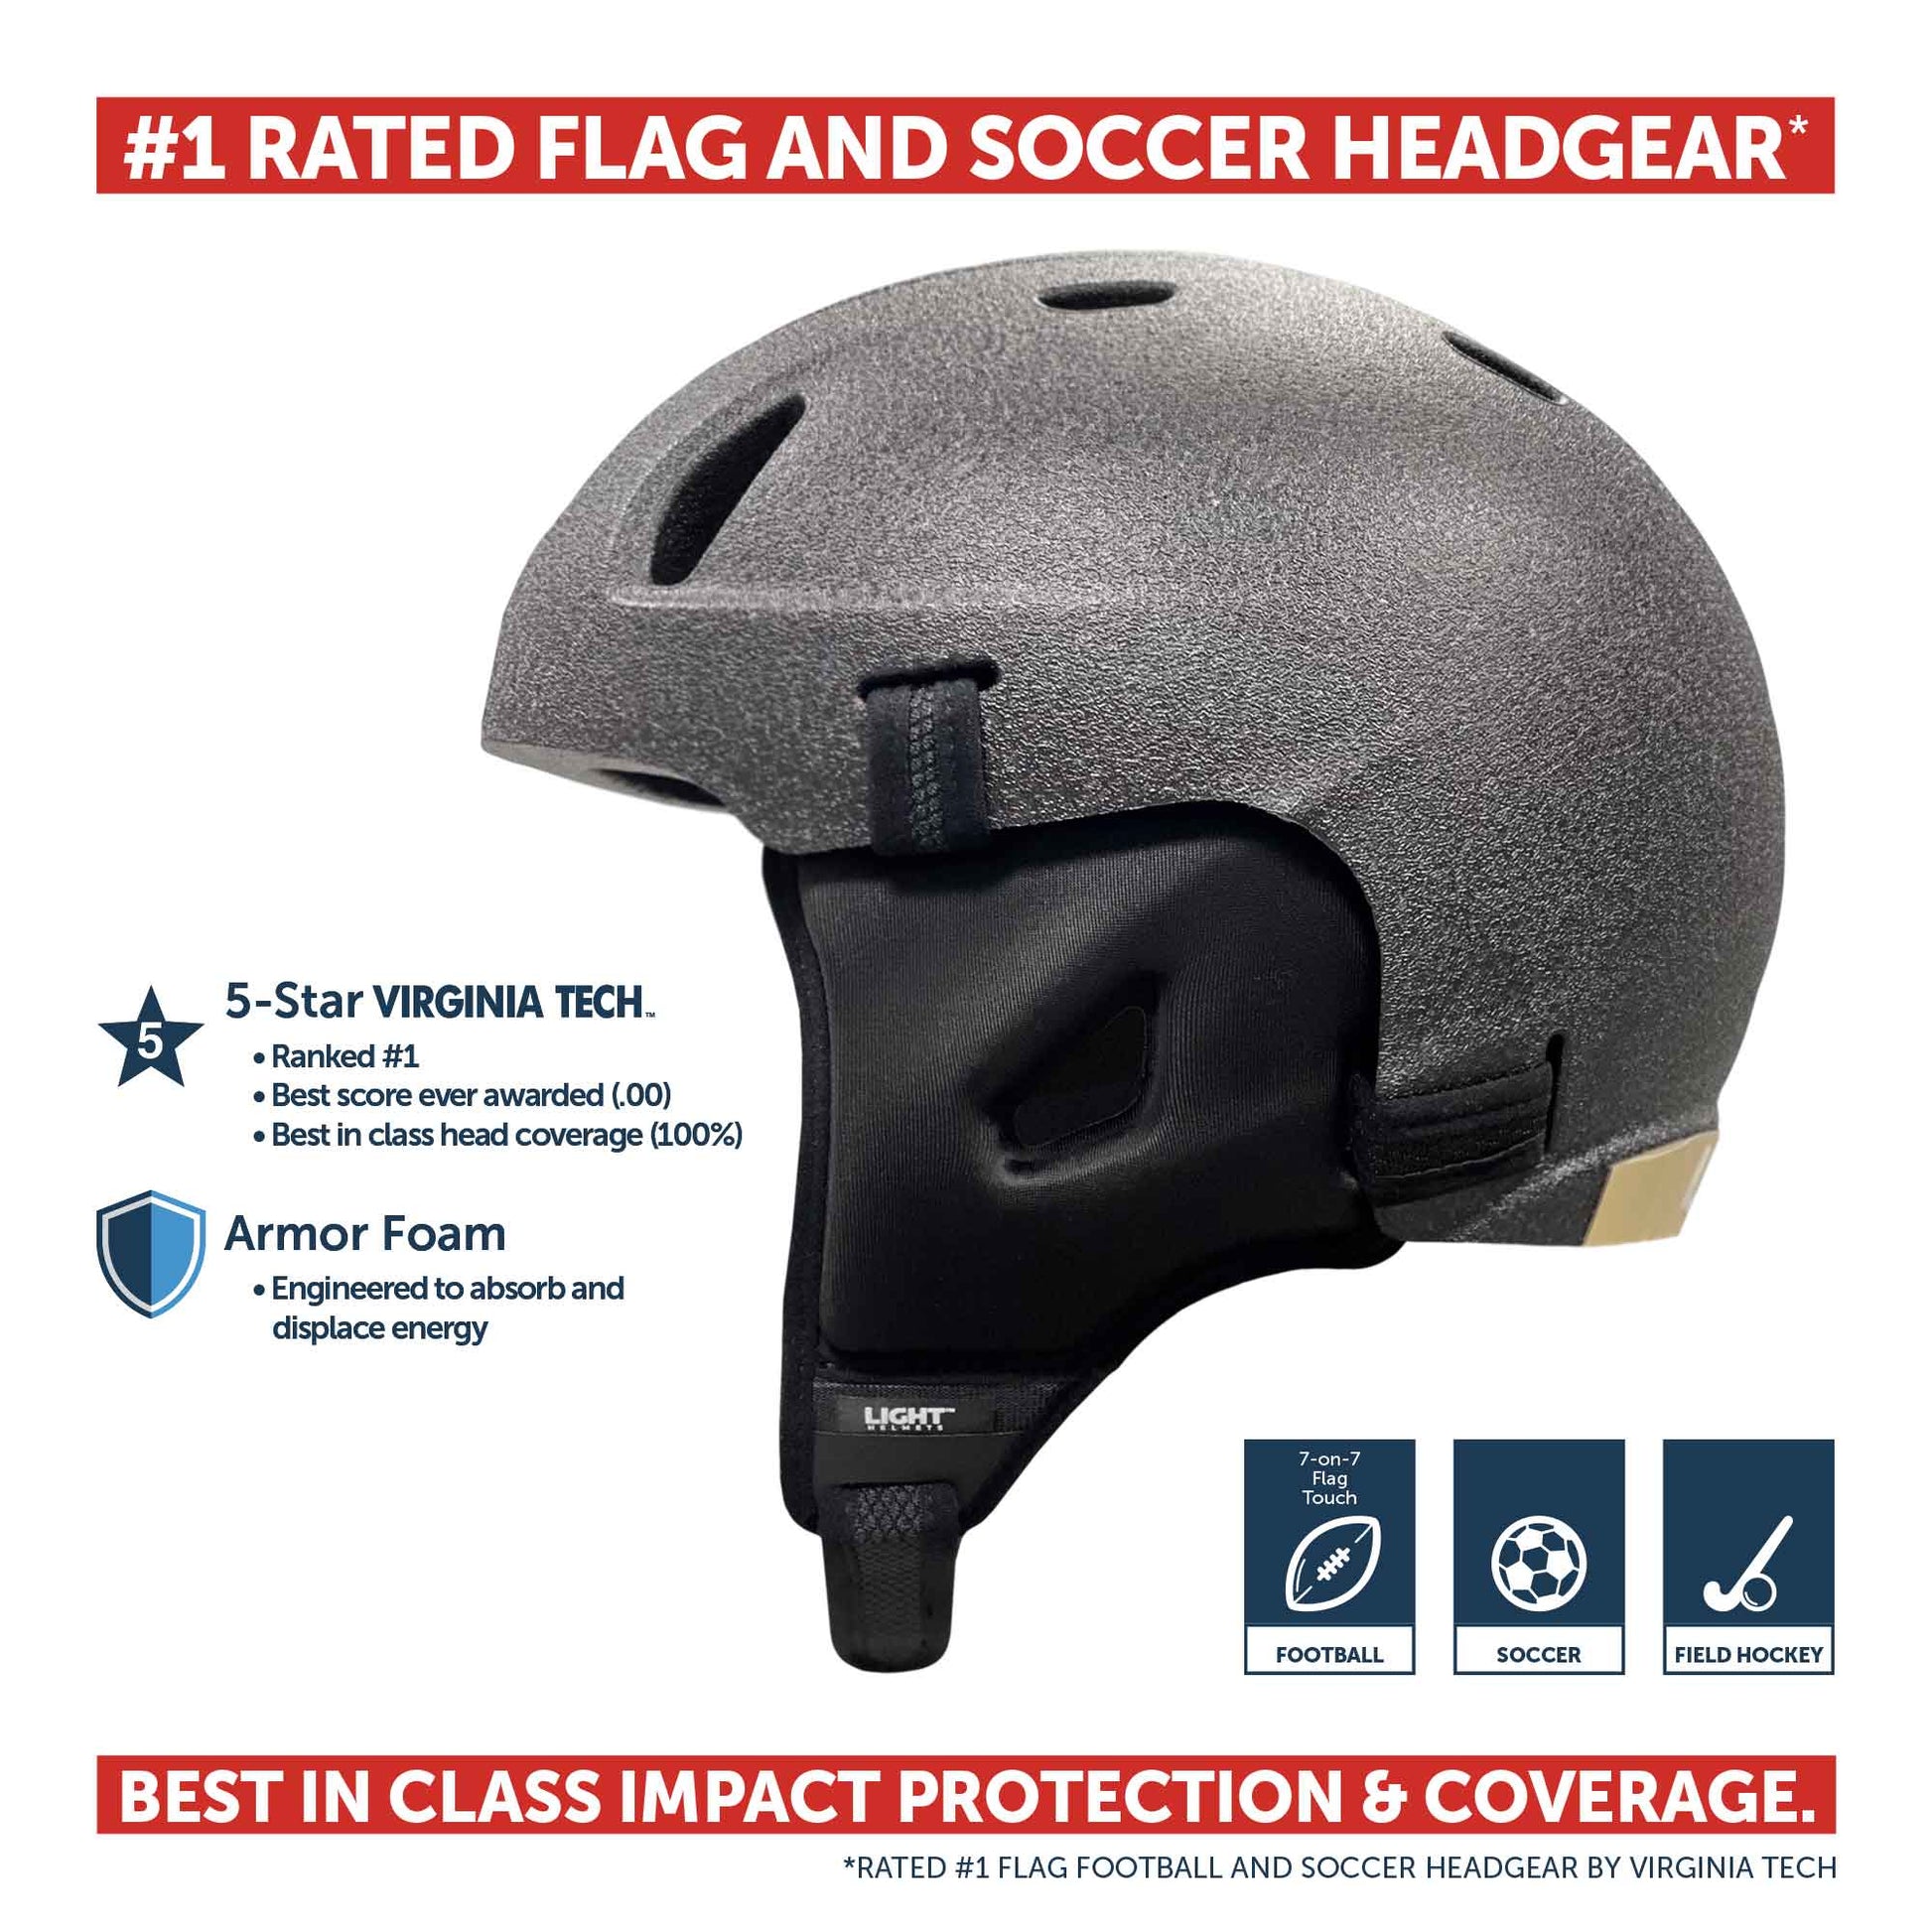 #1 Rated Flag and Soccer Headgear